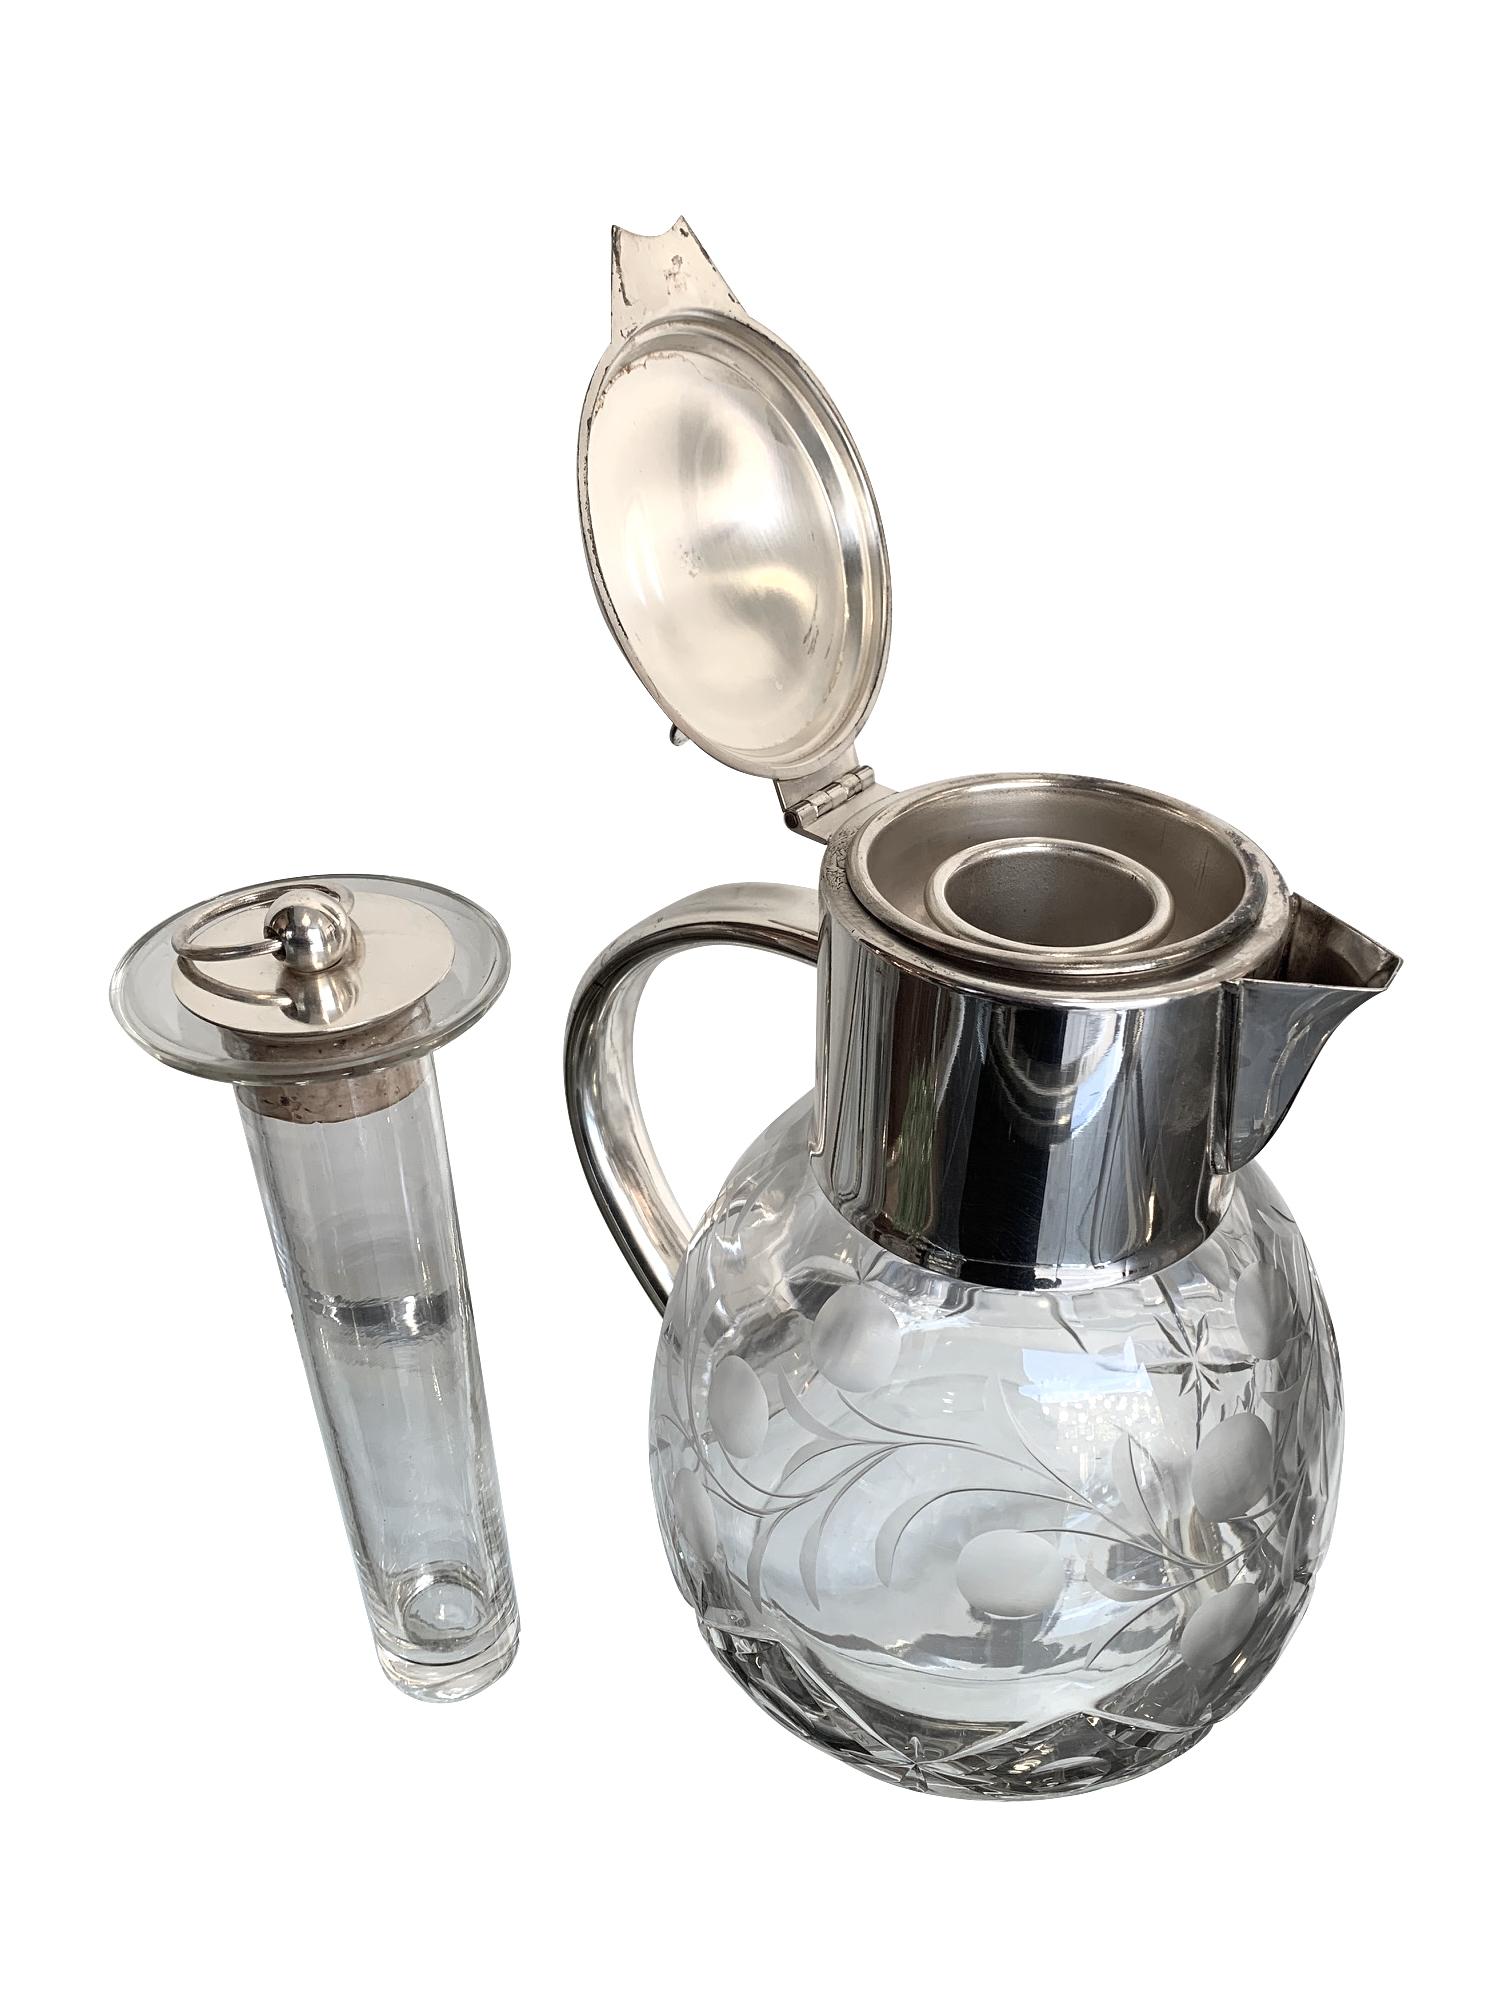 Art Deco English Silver Plated Crystal Lemonade / Cocktail Jug with Engraved Leaves